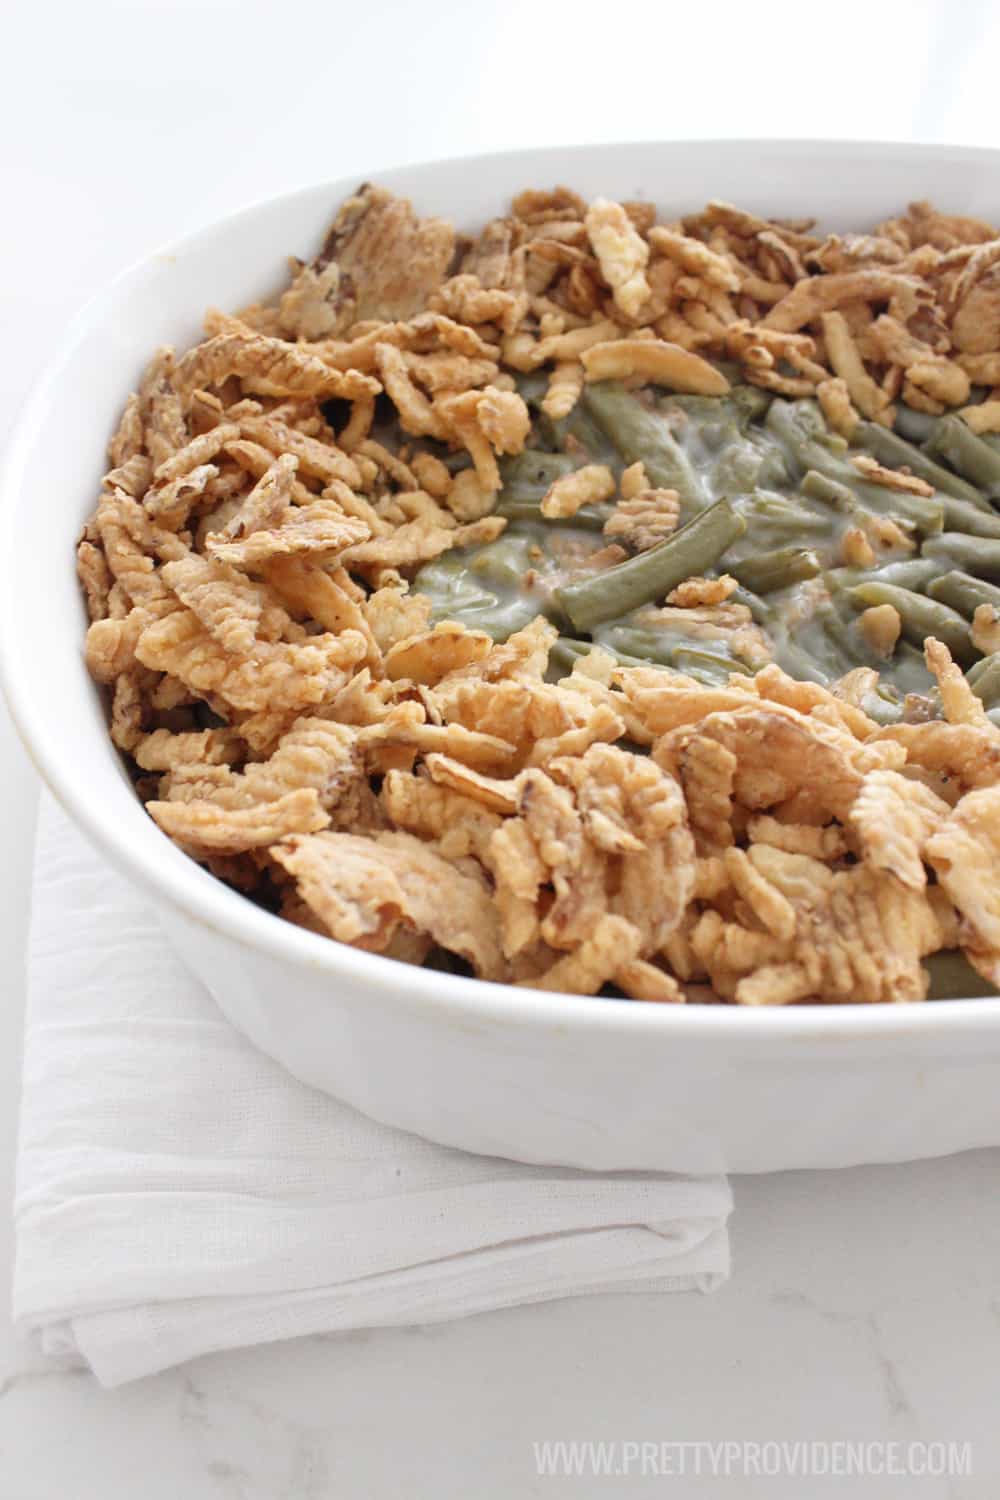 Green Bean Casserole with fried onions on top in a white dish.